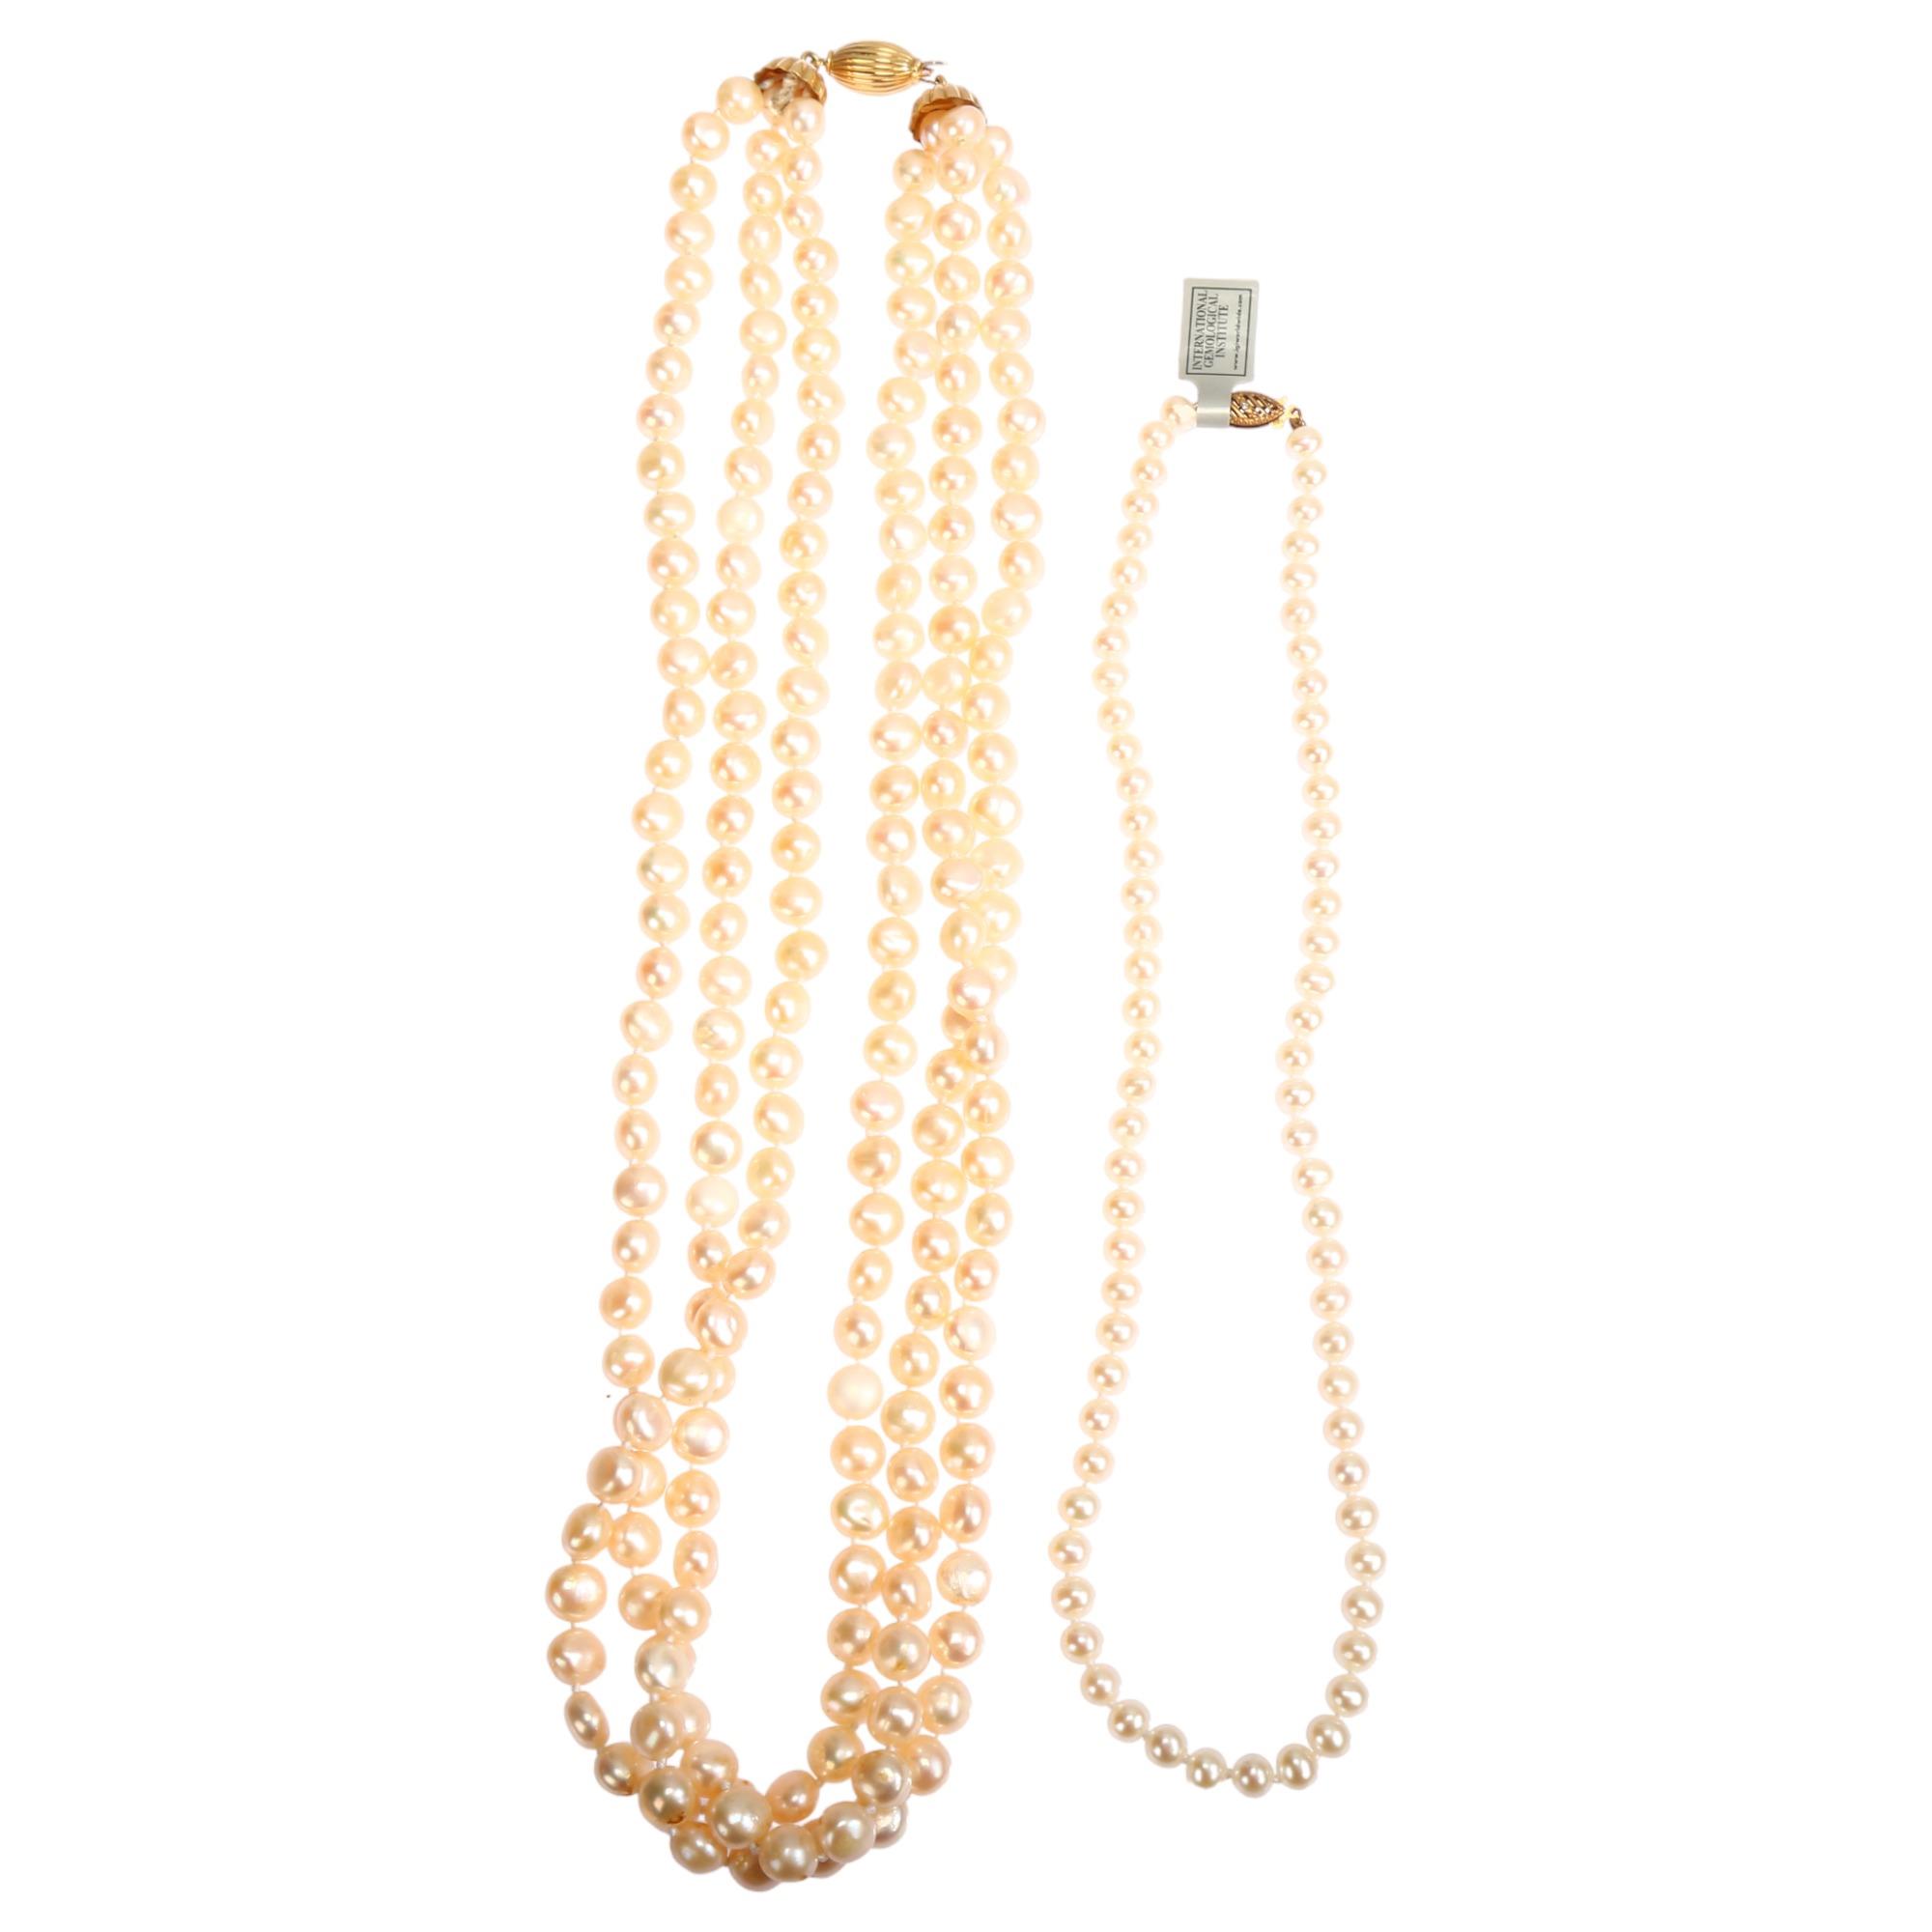 A triple-strand cultured pearl bead necklace, with 18ct barrel clasp, length 50cm, and a single-